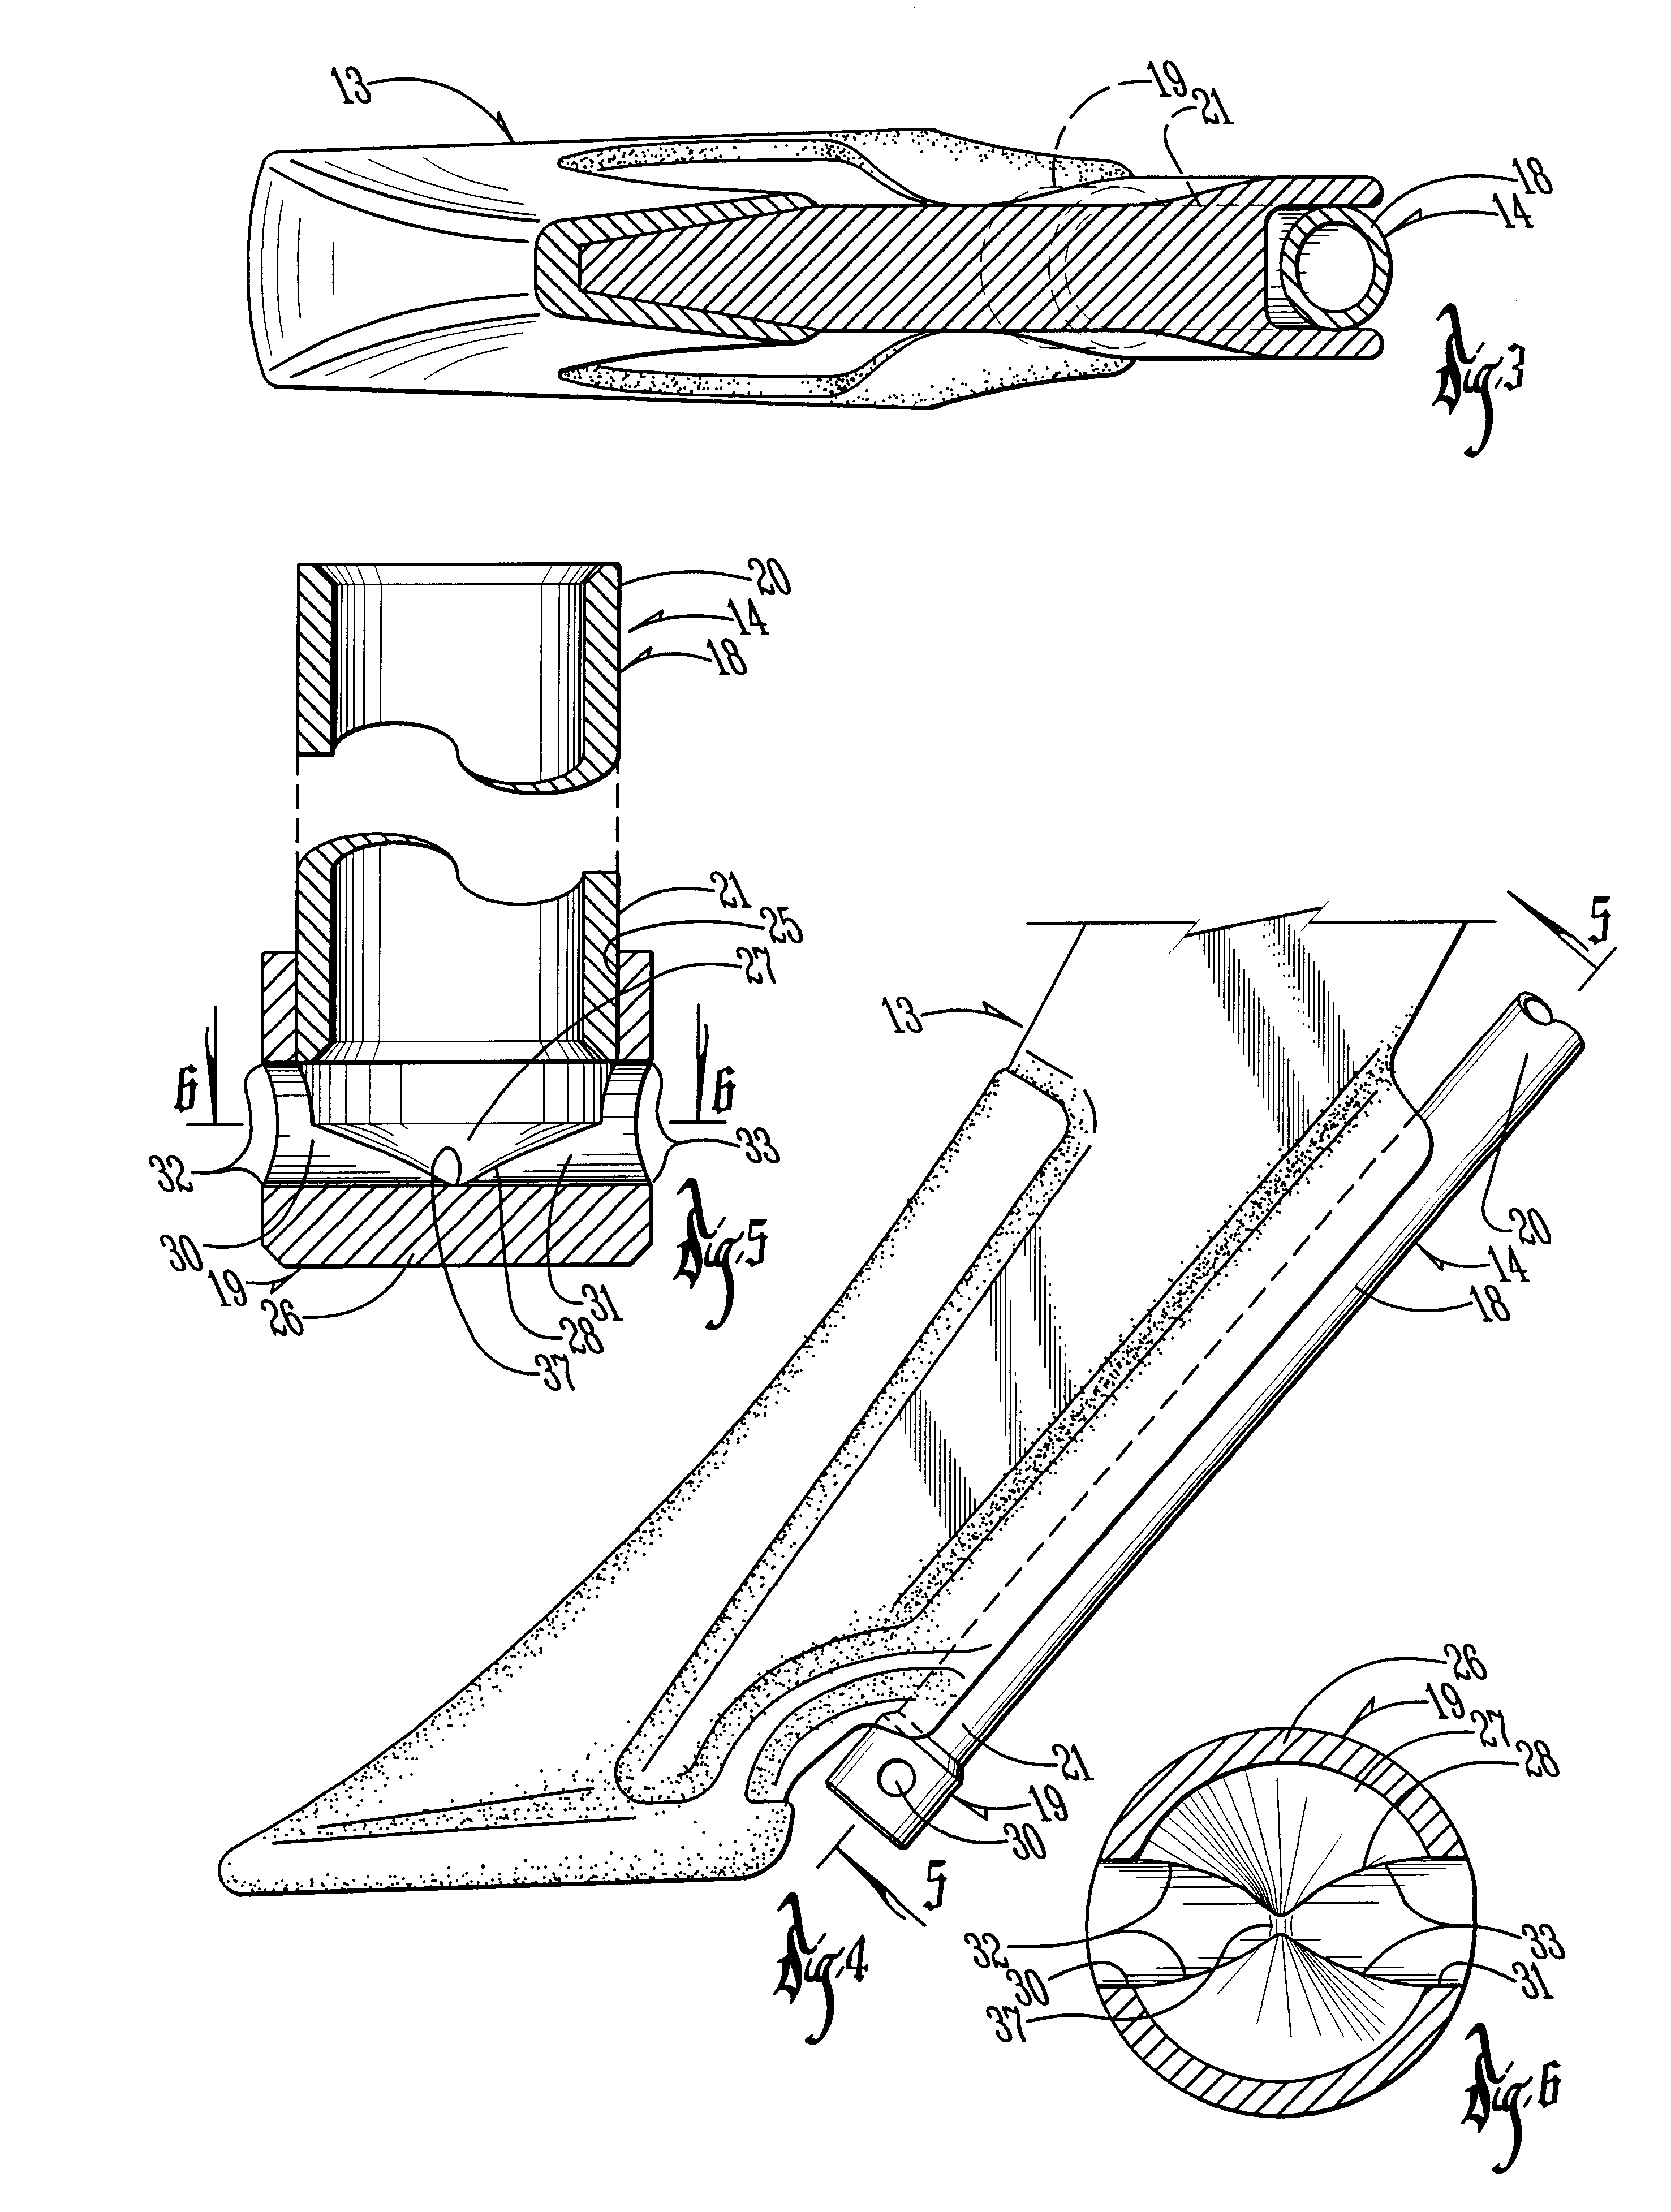 Anhydrous ammonia application device